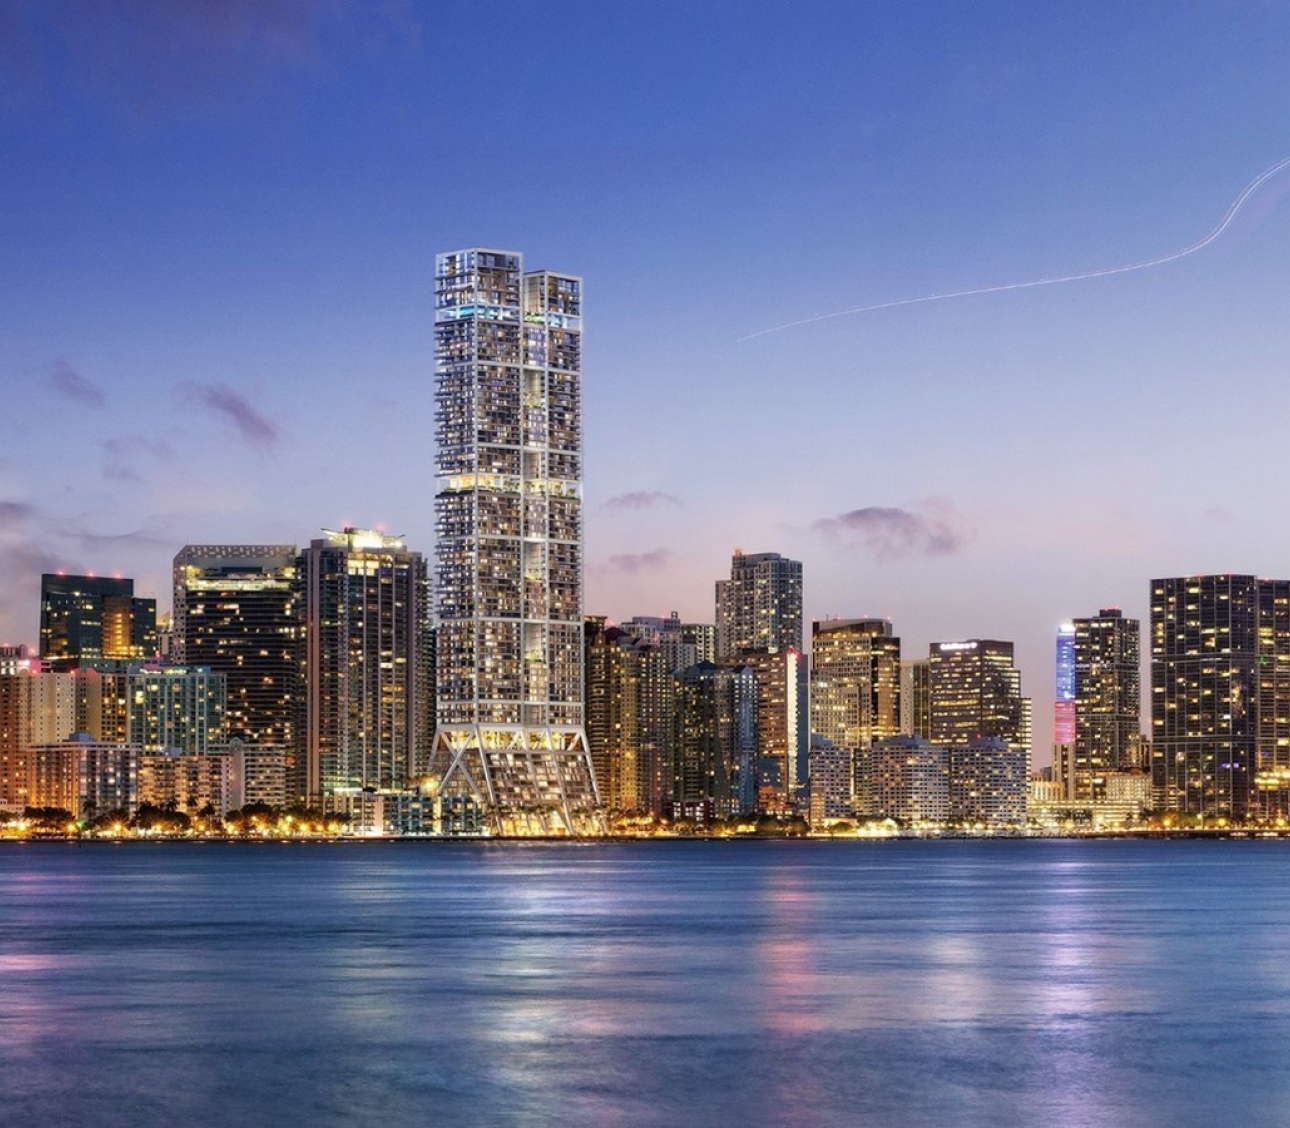 Image showing 1201 Brickell Bay Drive project